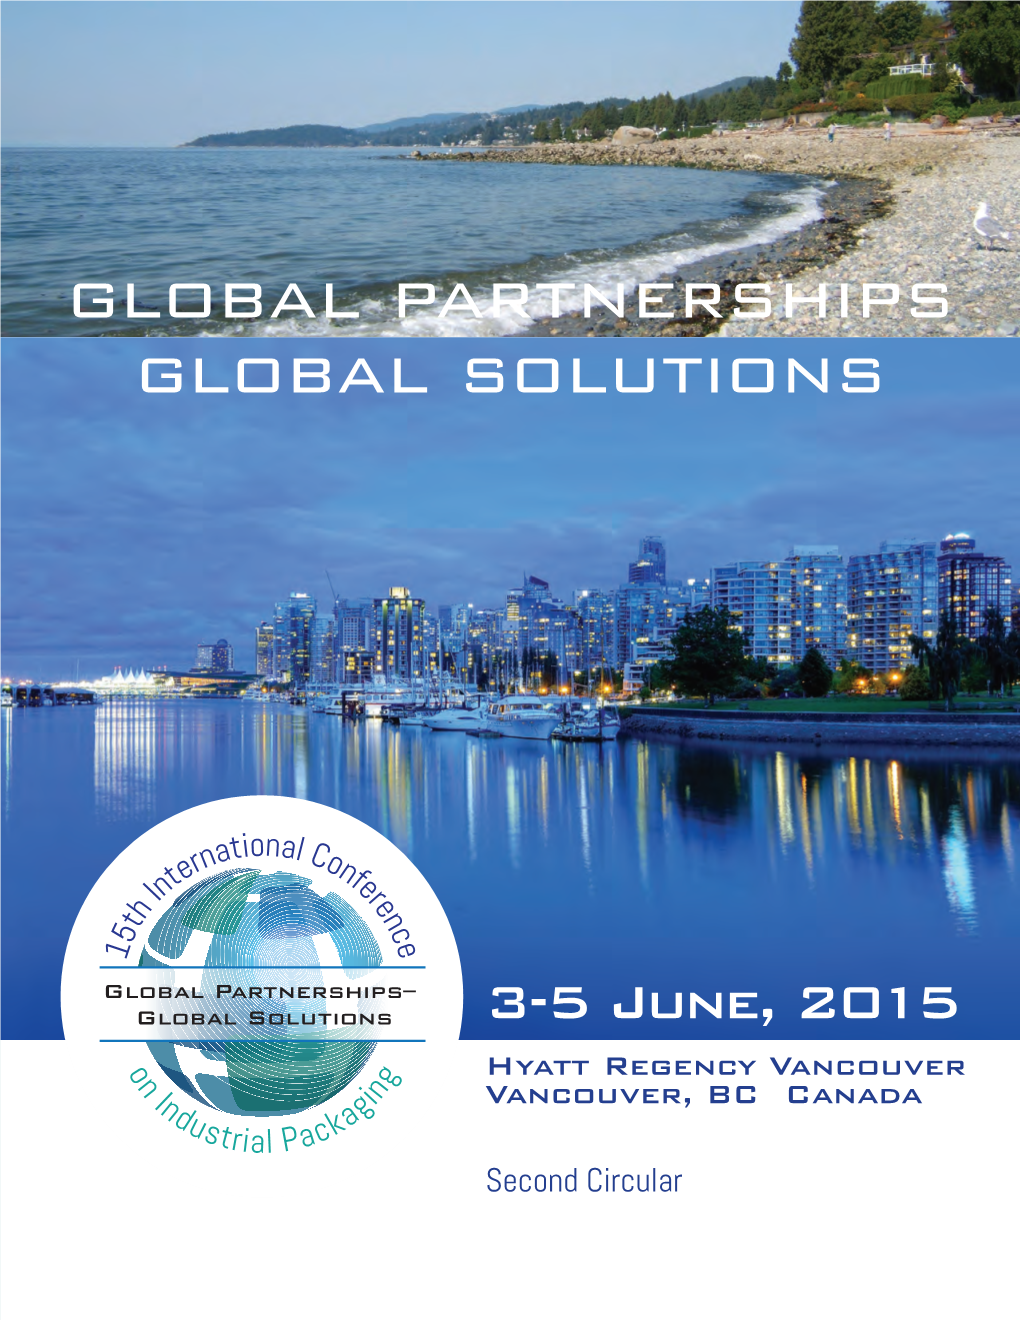 Global Partnerships Global Solutions Conference Information Conference Registration Hotel Accommodations All Registrations Must Be Made On-Line